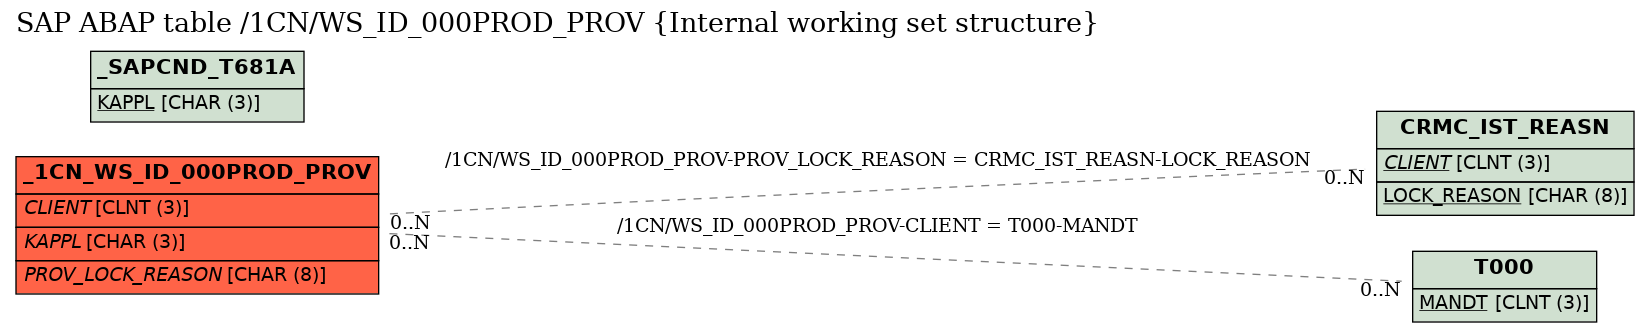 E-R Diagram for table /1CN/WS_ID_000PROD_PROV (Internal working set structure)